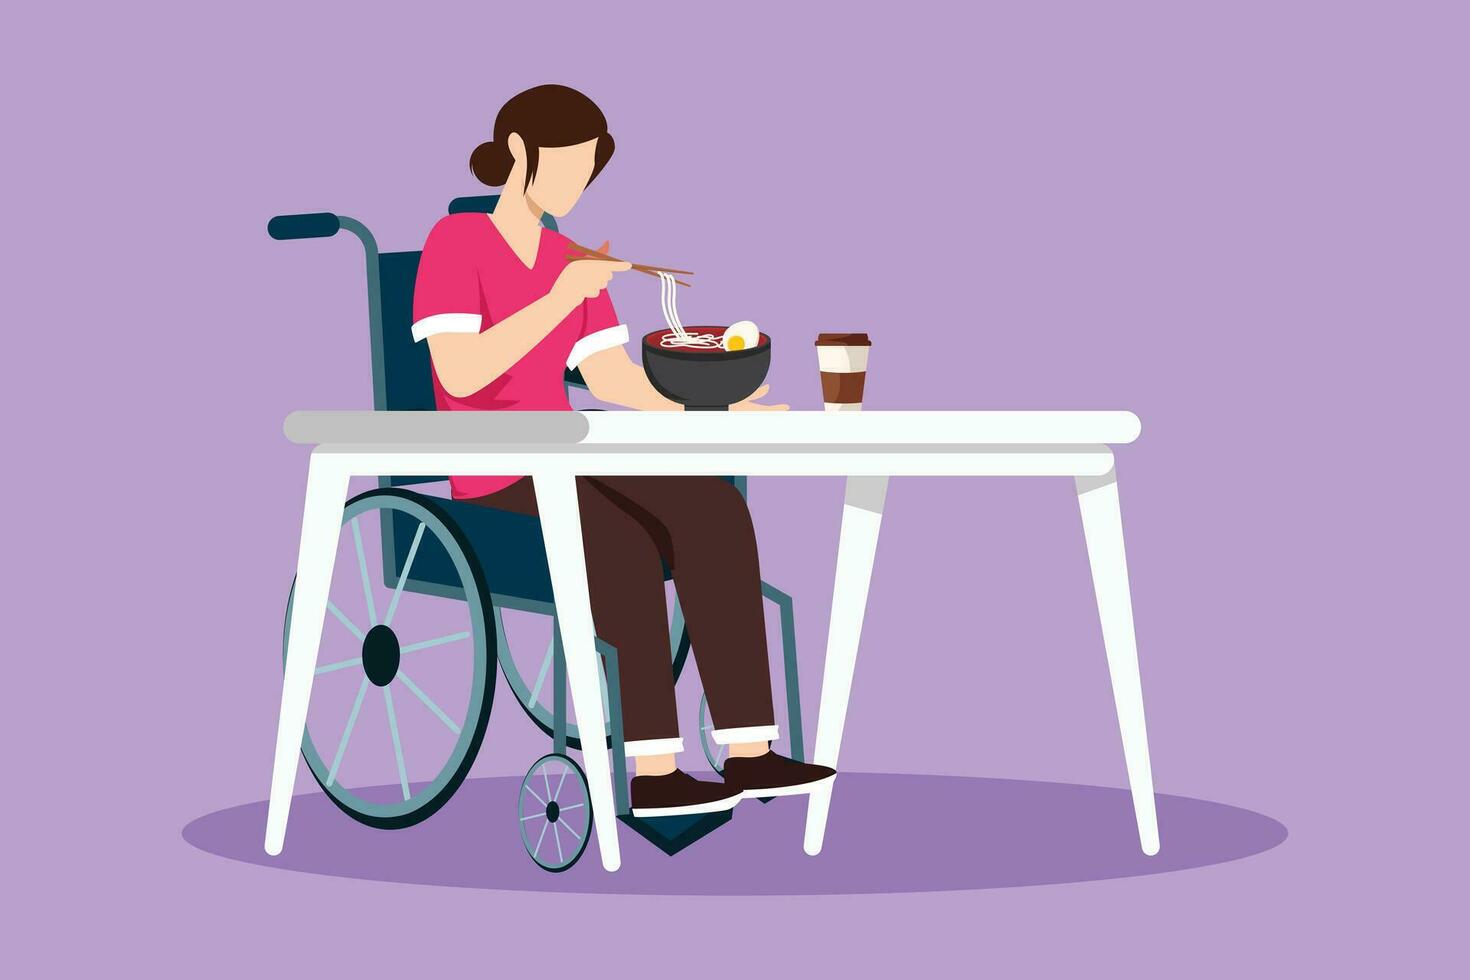 Character flat drawing young female patient in wheelchair eating ramen or noodle food and sitting at table. Having lunch, snack in cafe. Society and disabled people. Cartoon design vector illustration